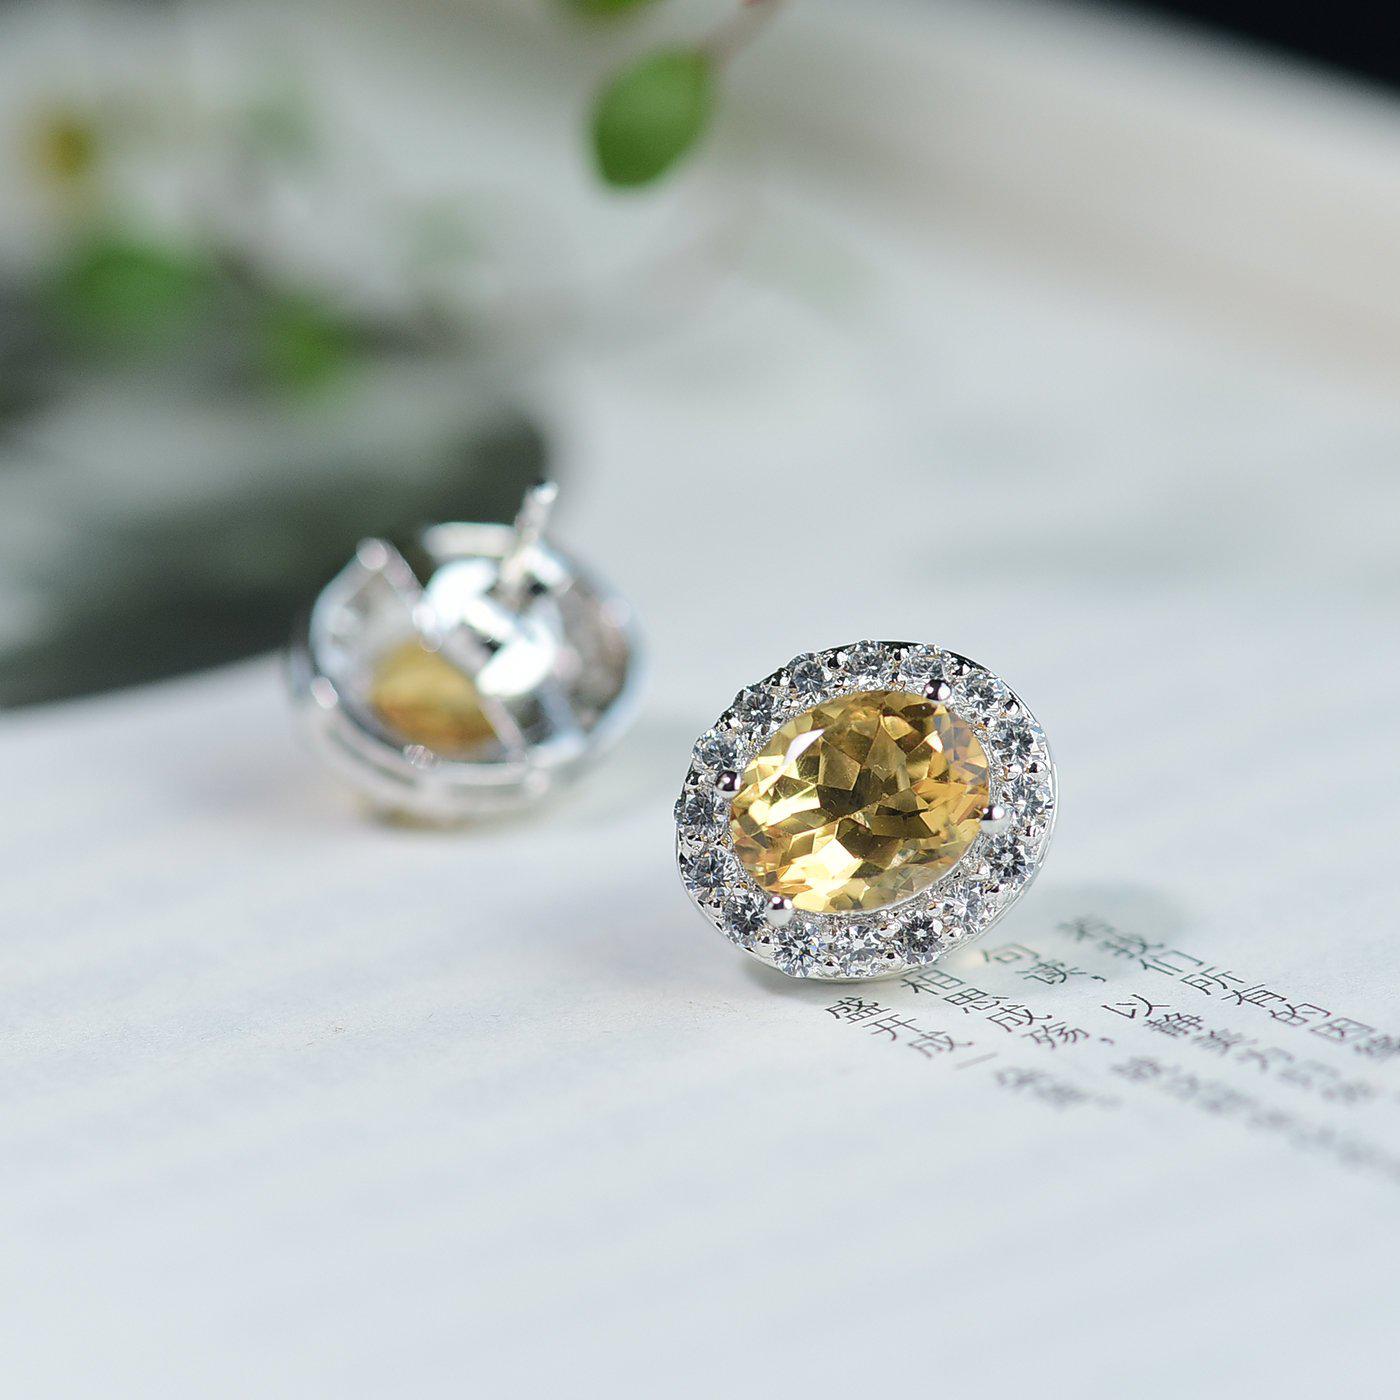 Real Citrine Earring Studs | Oval Cut Golden Citrine Gemstone Stud | 3ct+3ct Citrine Earring 4 Prong Anniversary Stud for Women | 925 Silver